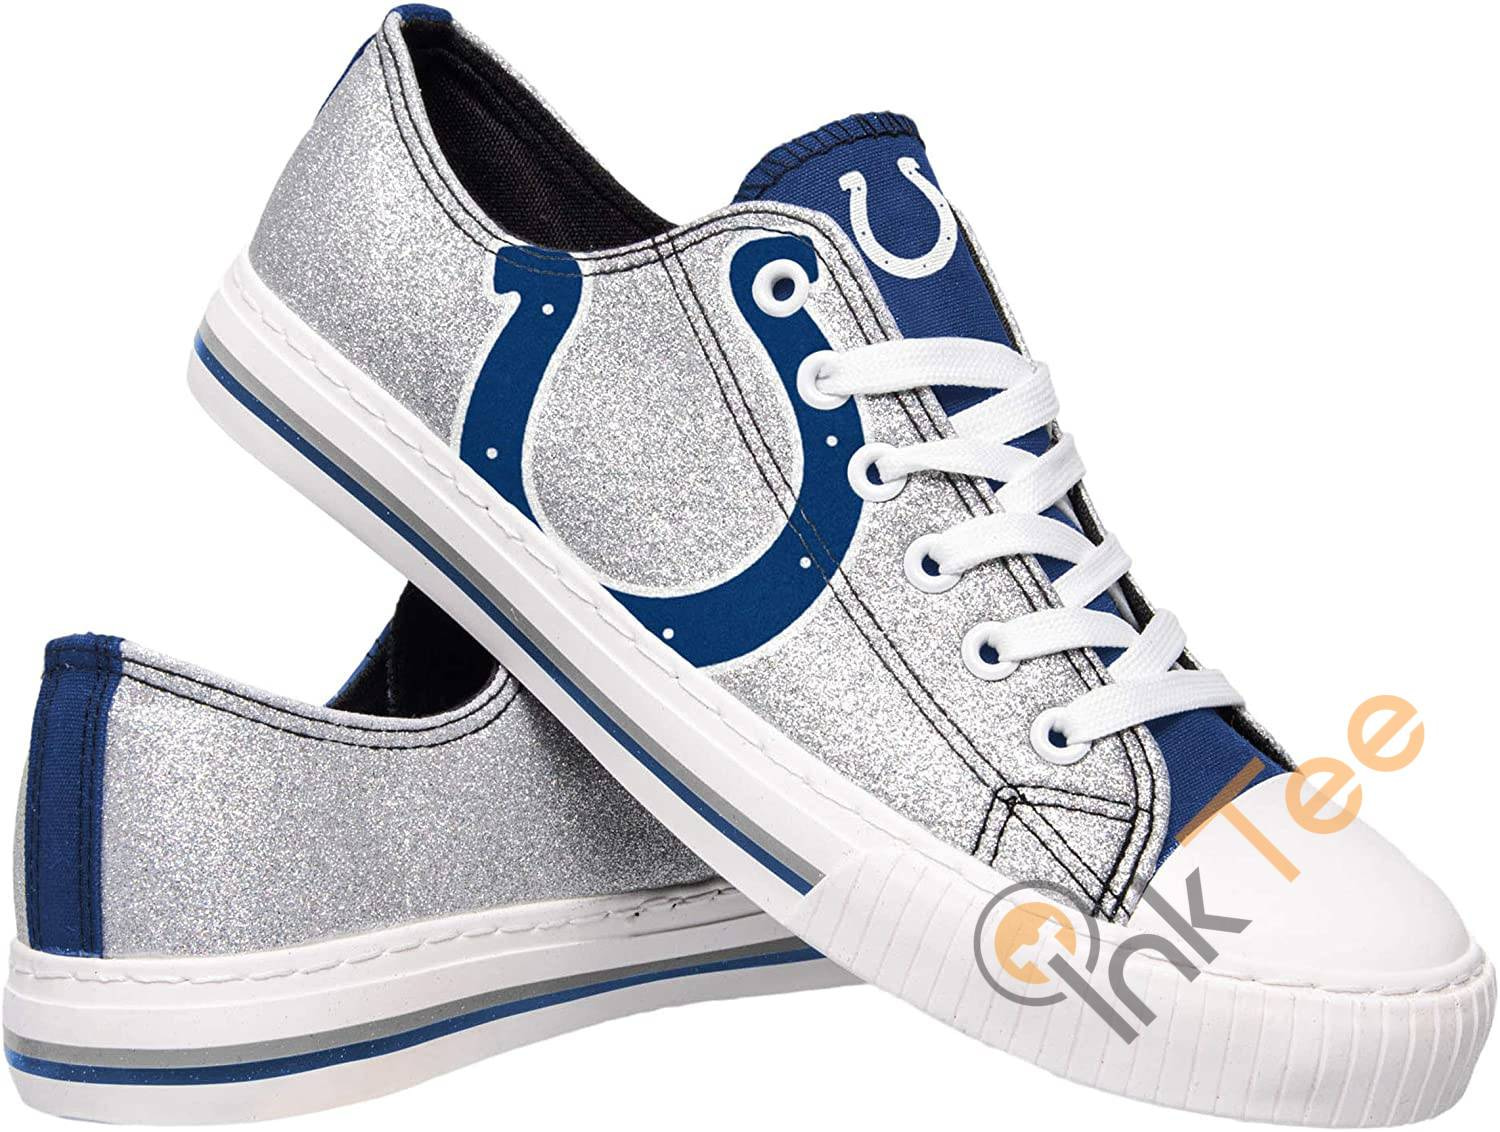 Nfl Indianapolis Colts Team Low Top Sneakers